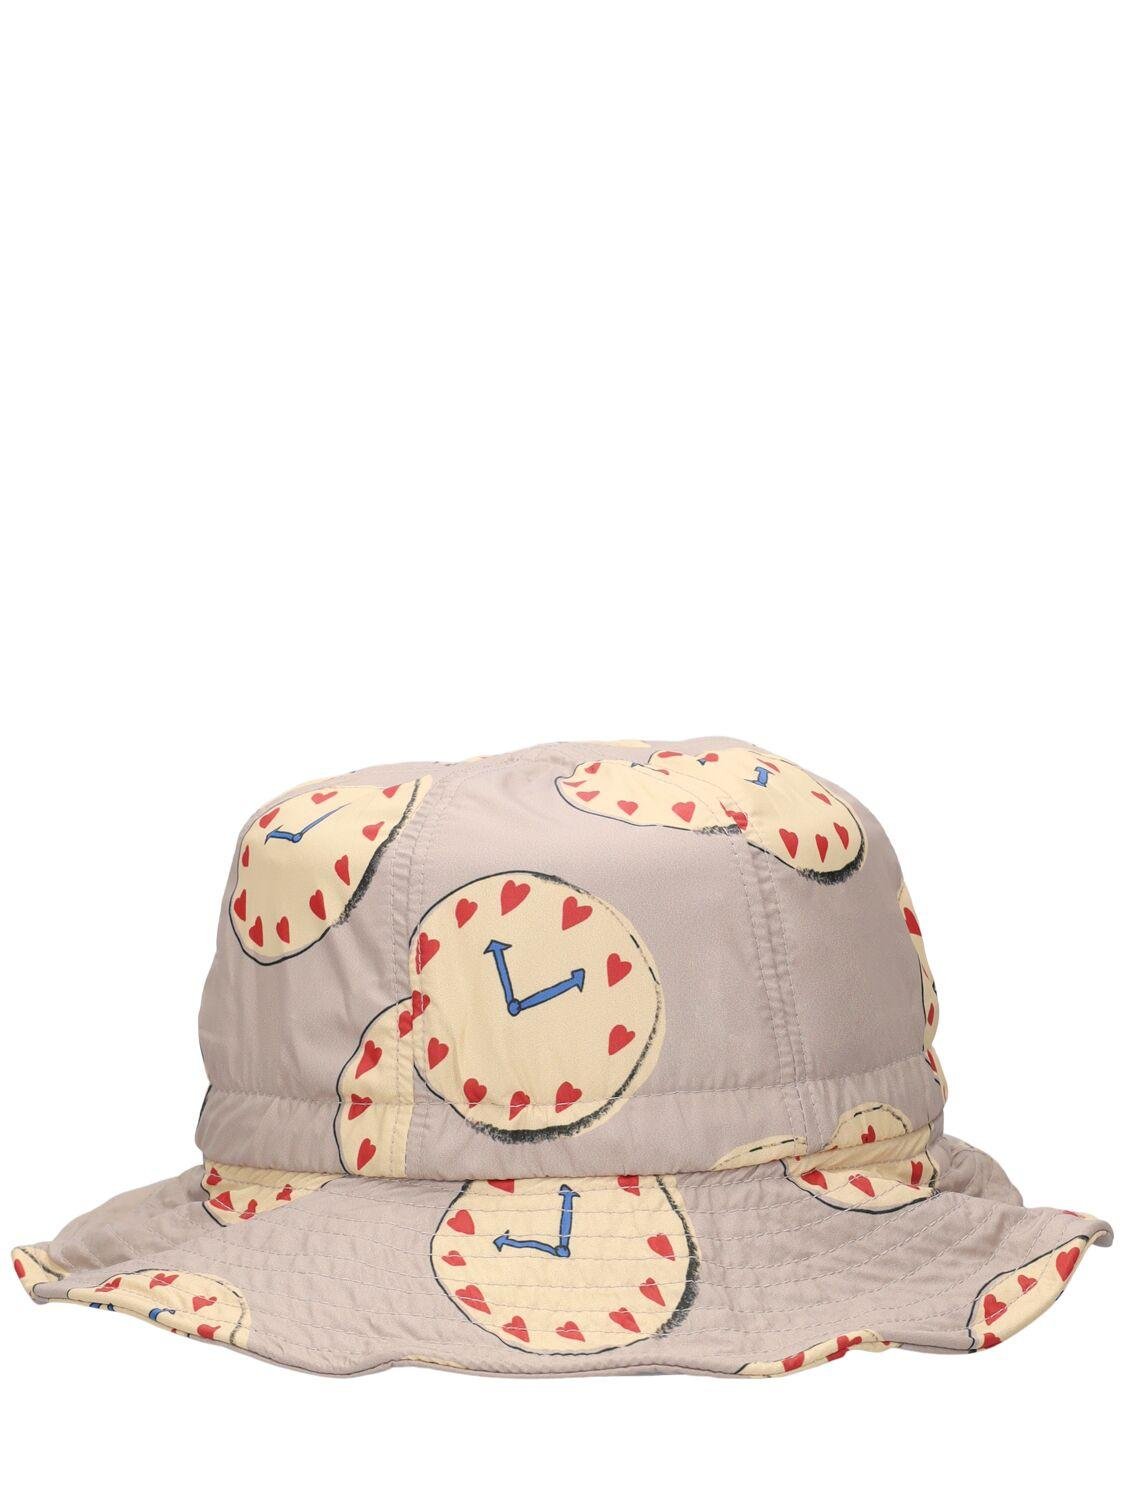 Clock Printed Cotton Bucket Hat by JELLYMALLOW